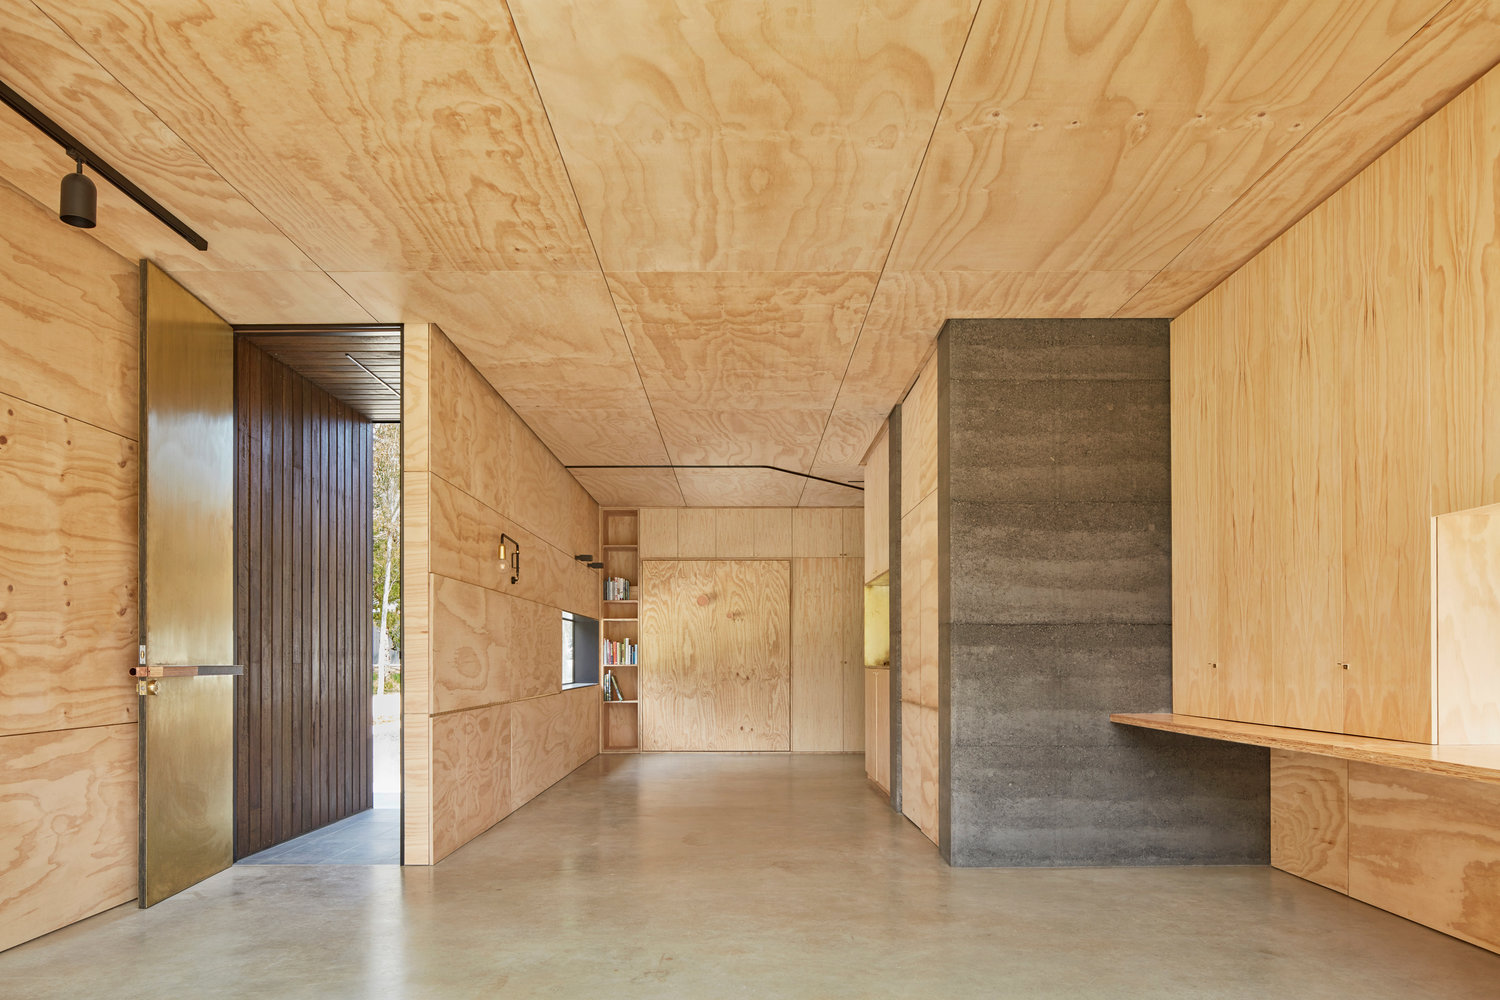 Tumult Tigge udtale Rammed Earth and the difference it makes. | green magazine